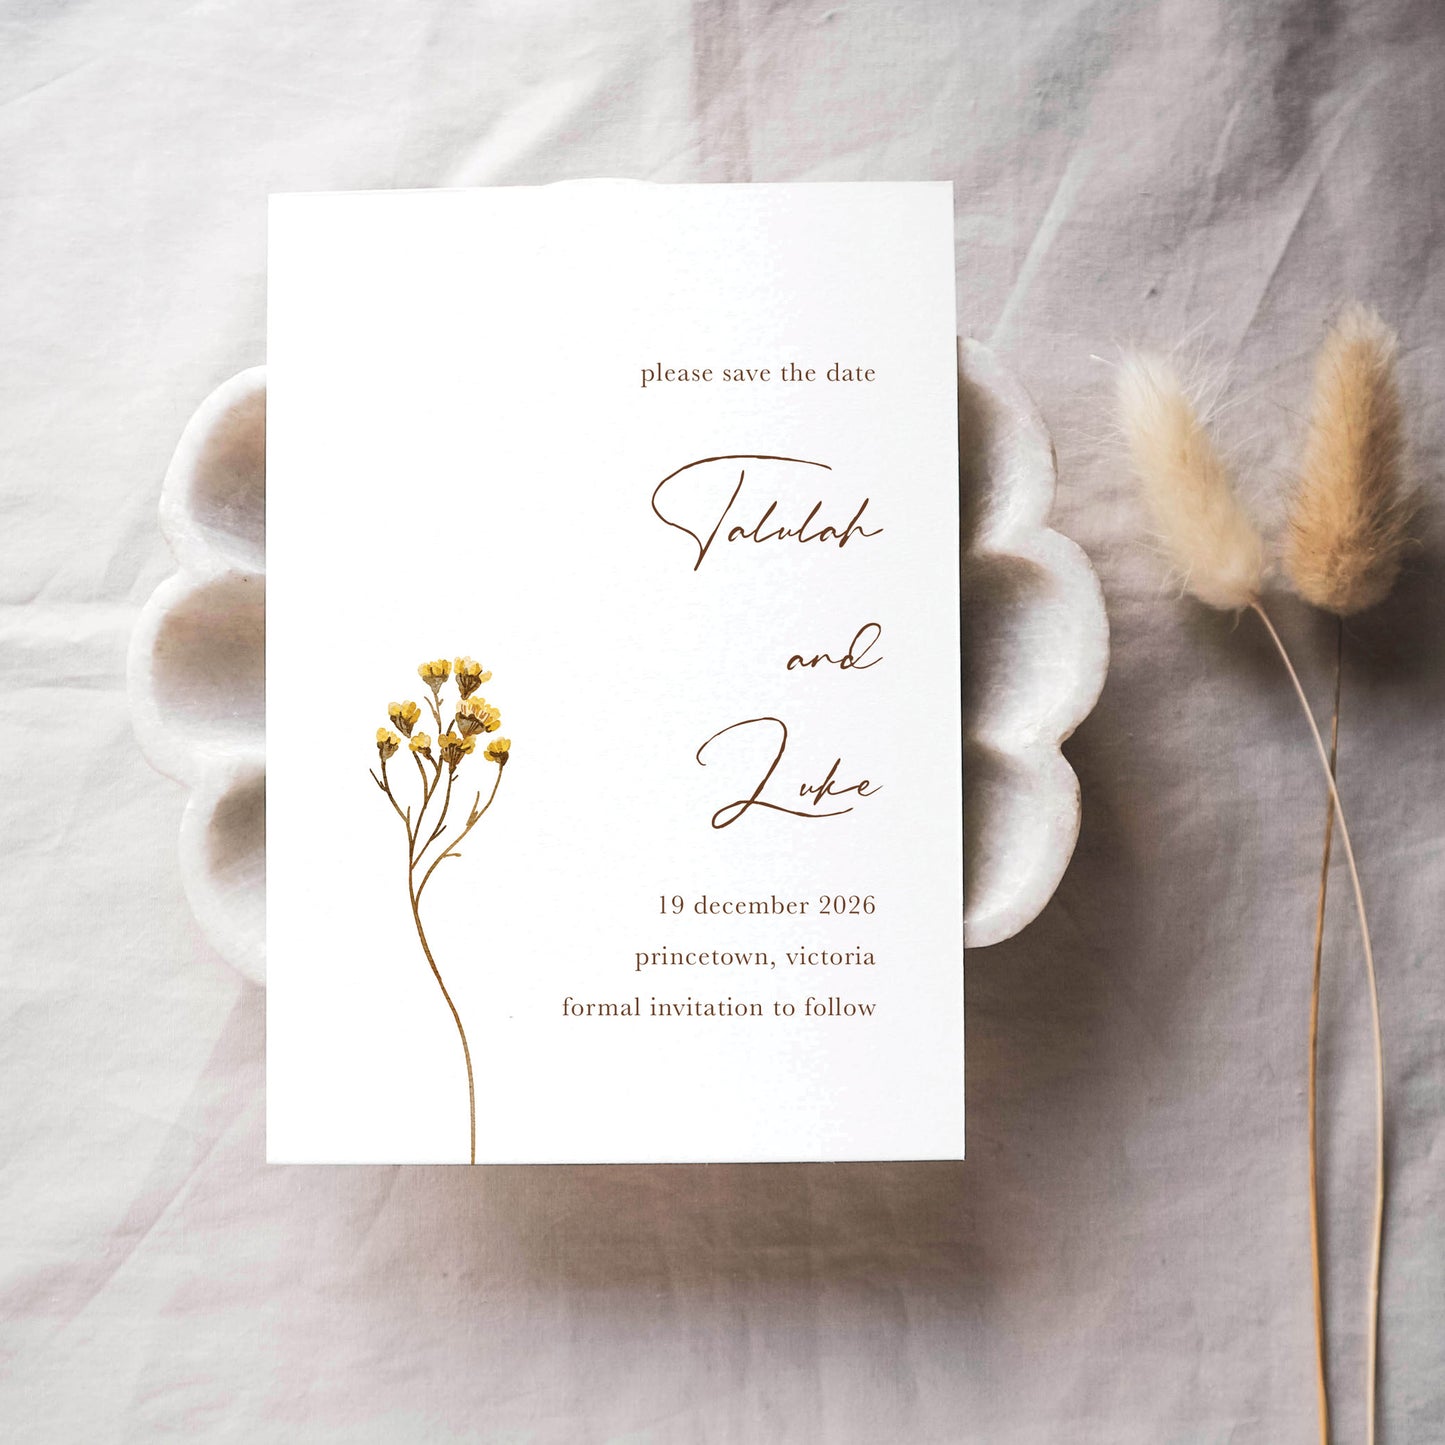 Modern Rustic Save The Date Cards | Perth